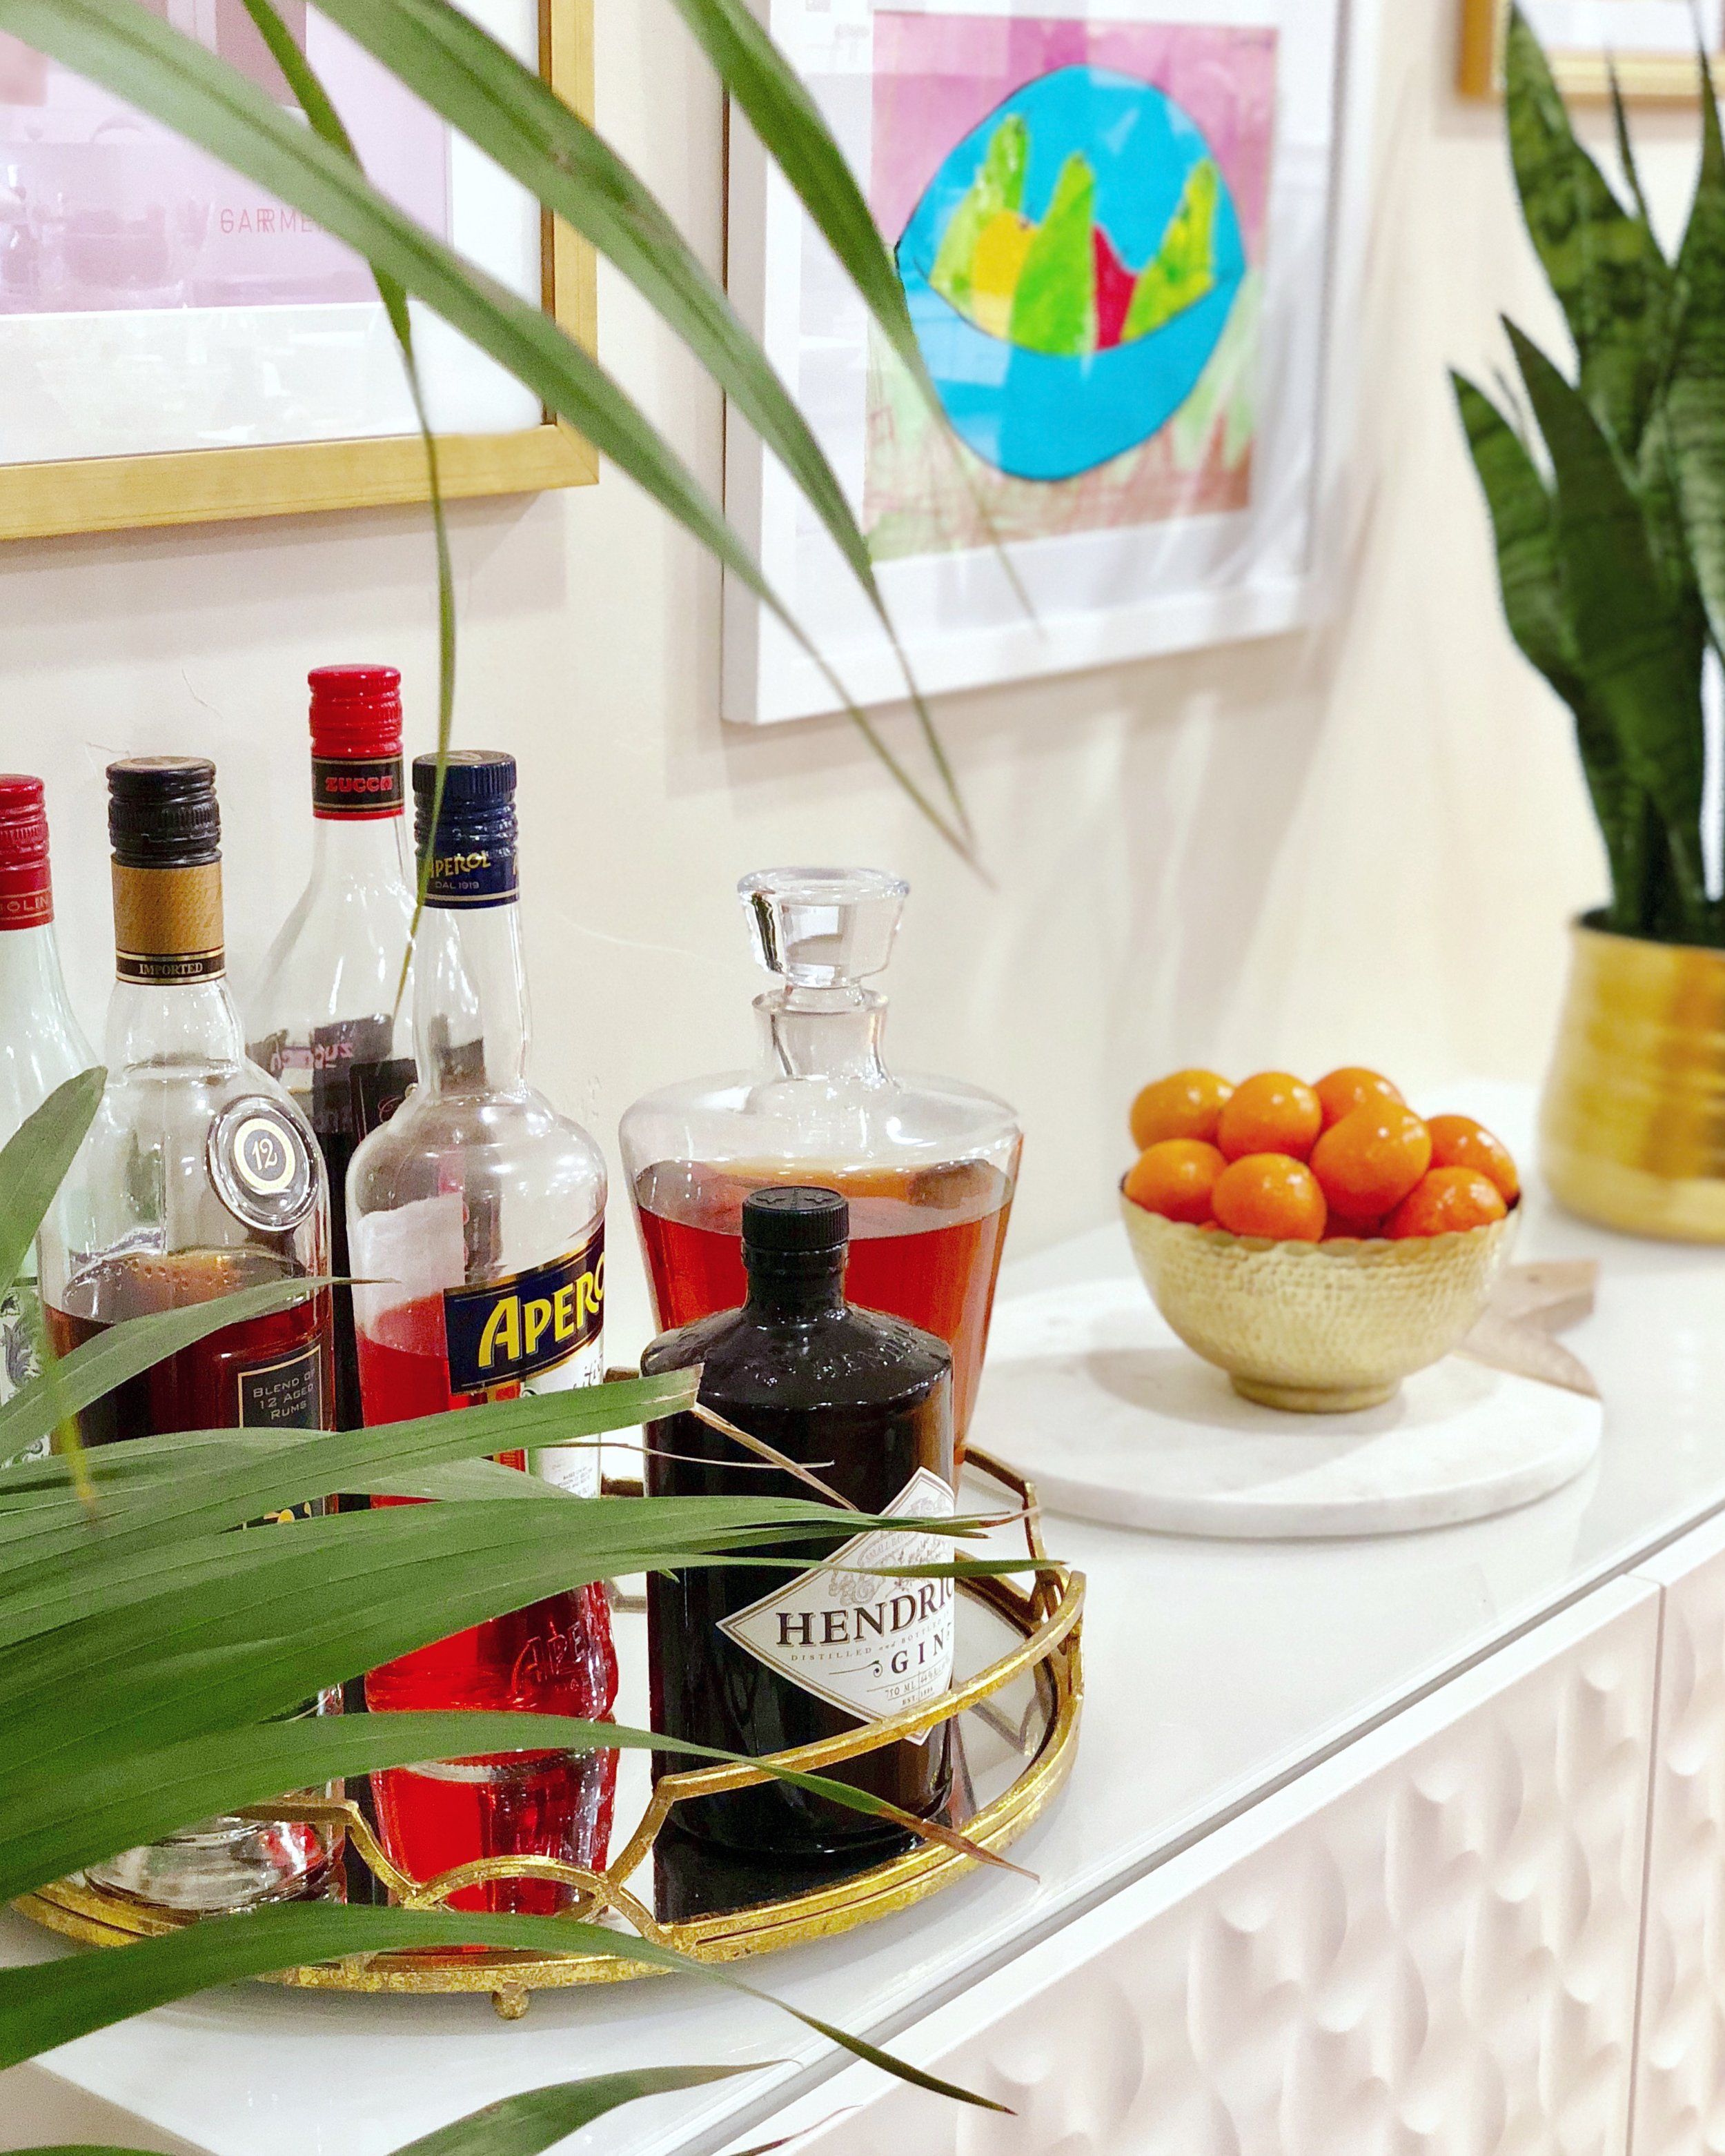 Ikea Hack Bar Cabinet Inspired By Brittany Makes Leilakramer